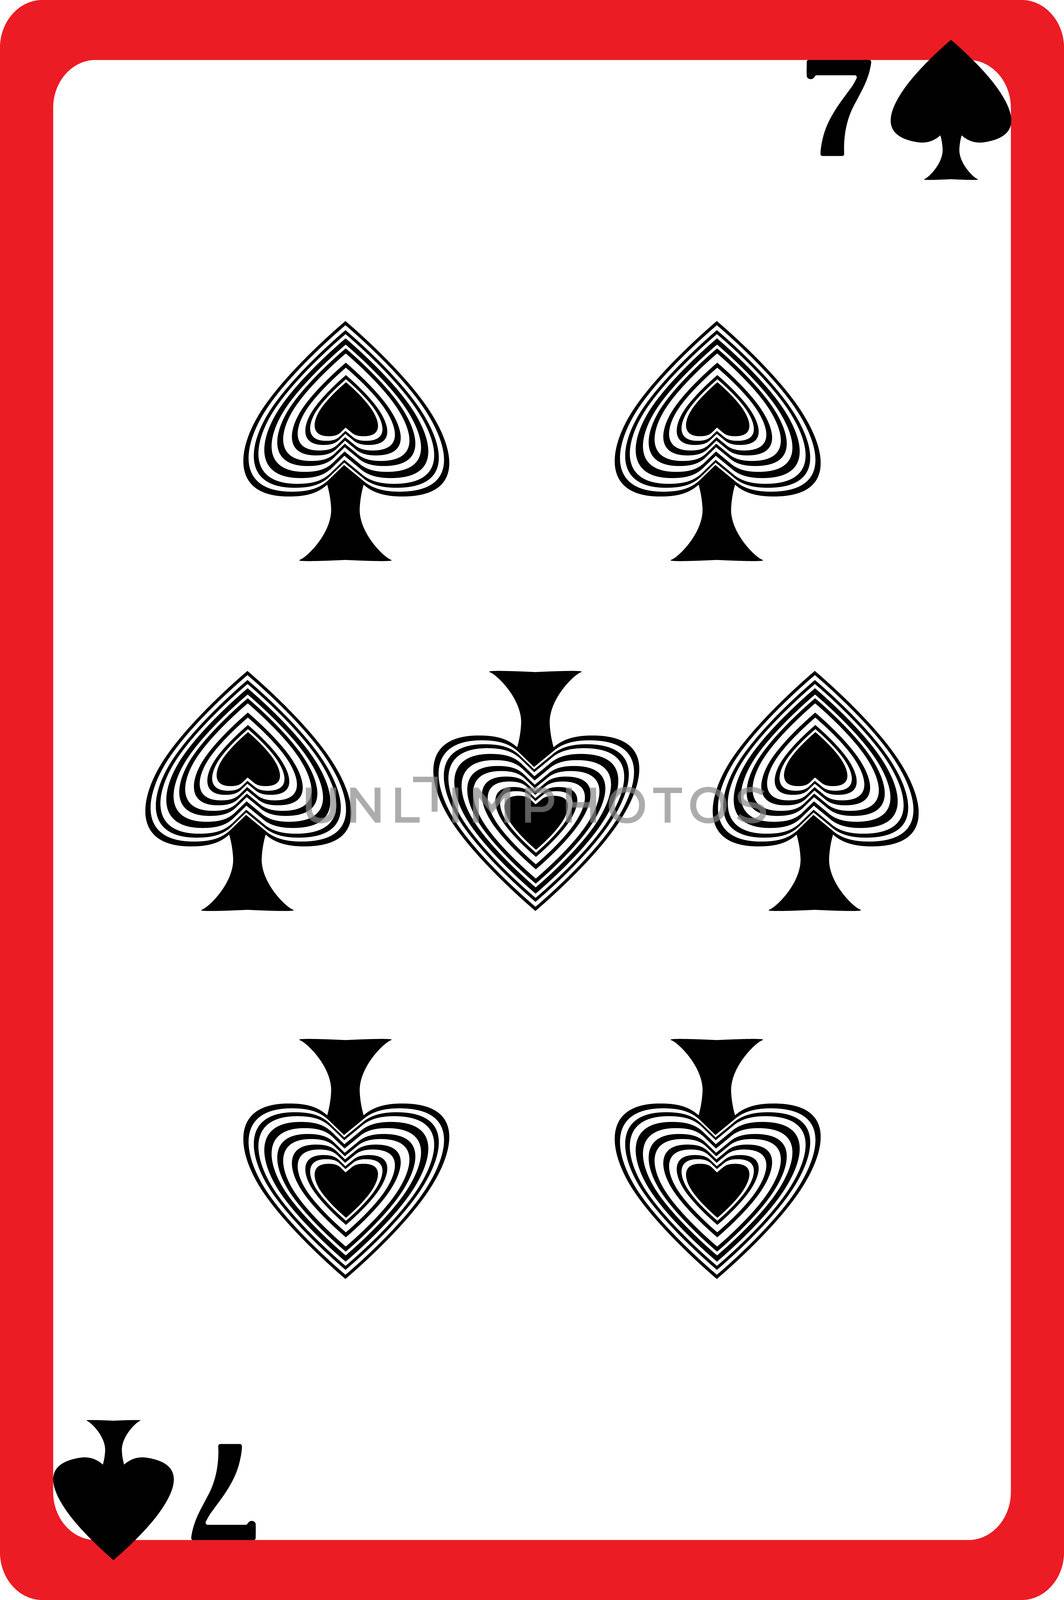 Scale hand drawn illustration of a playing card representing the seven of spades, one element of a deck